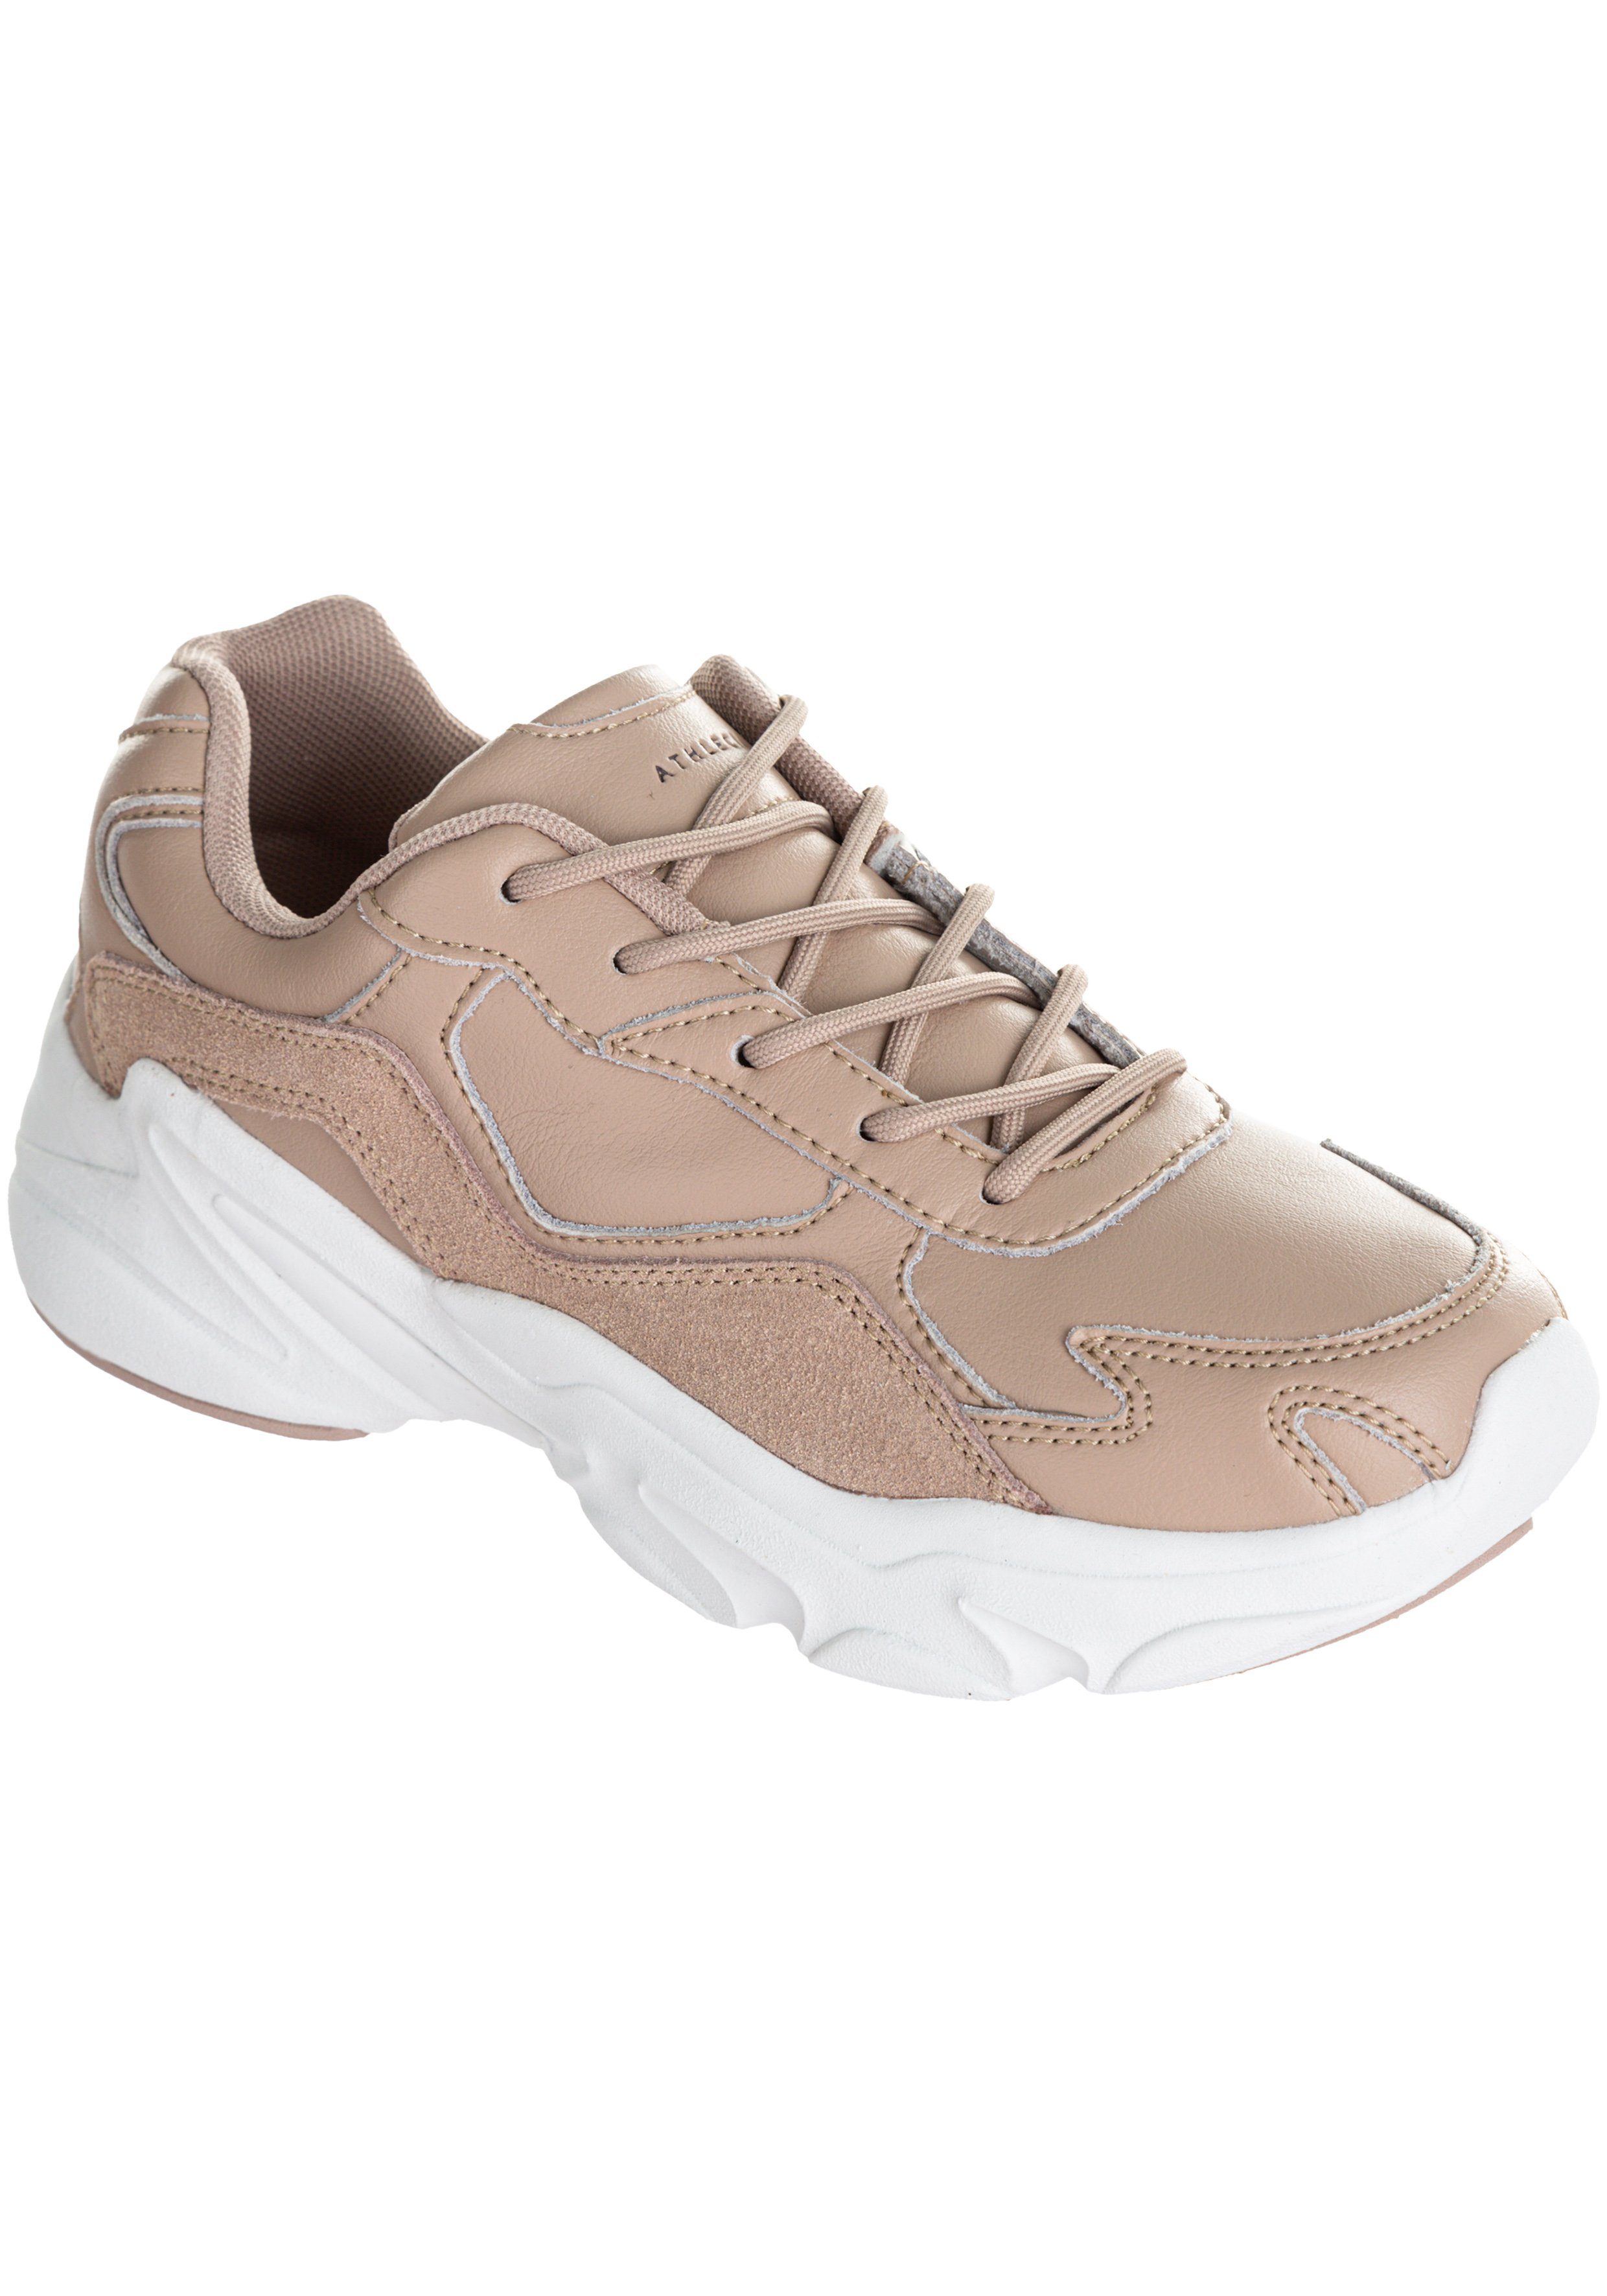 ATHLECIA »CHUNKY Leather Trainers« Sneaker im sportlichen Style